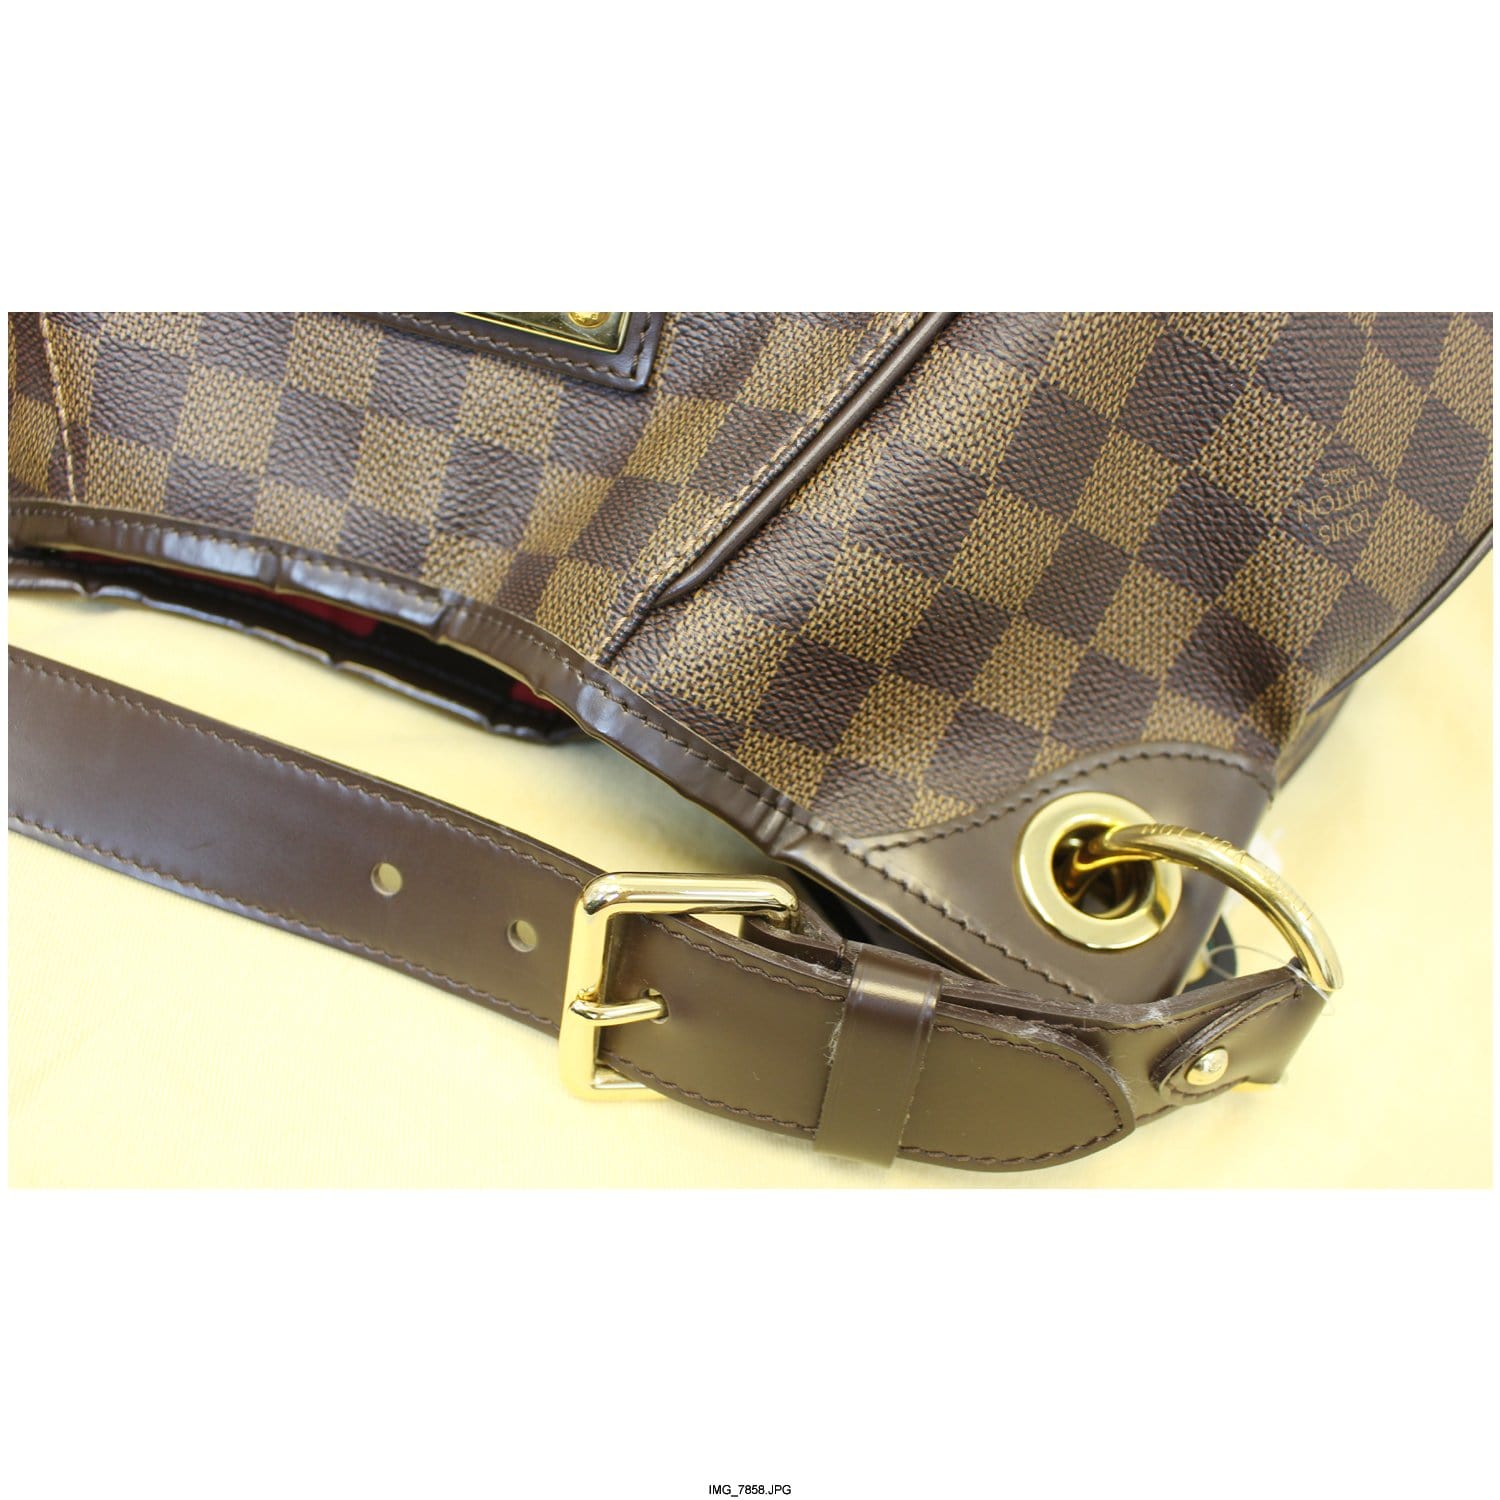 LV GALLERIA PM!!! Damier Ebene OR Damier Azur!! You pick which one you want  🙌🏻 Back on the Rack Upscale Resale Consignment is a reseller of authentic